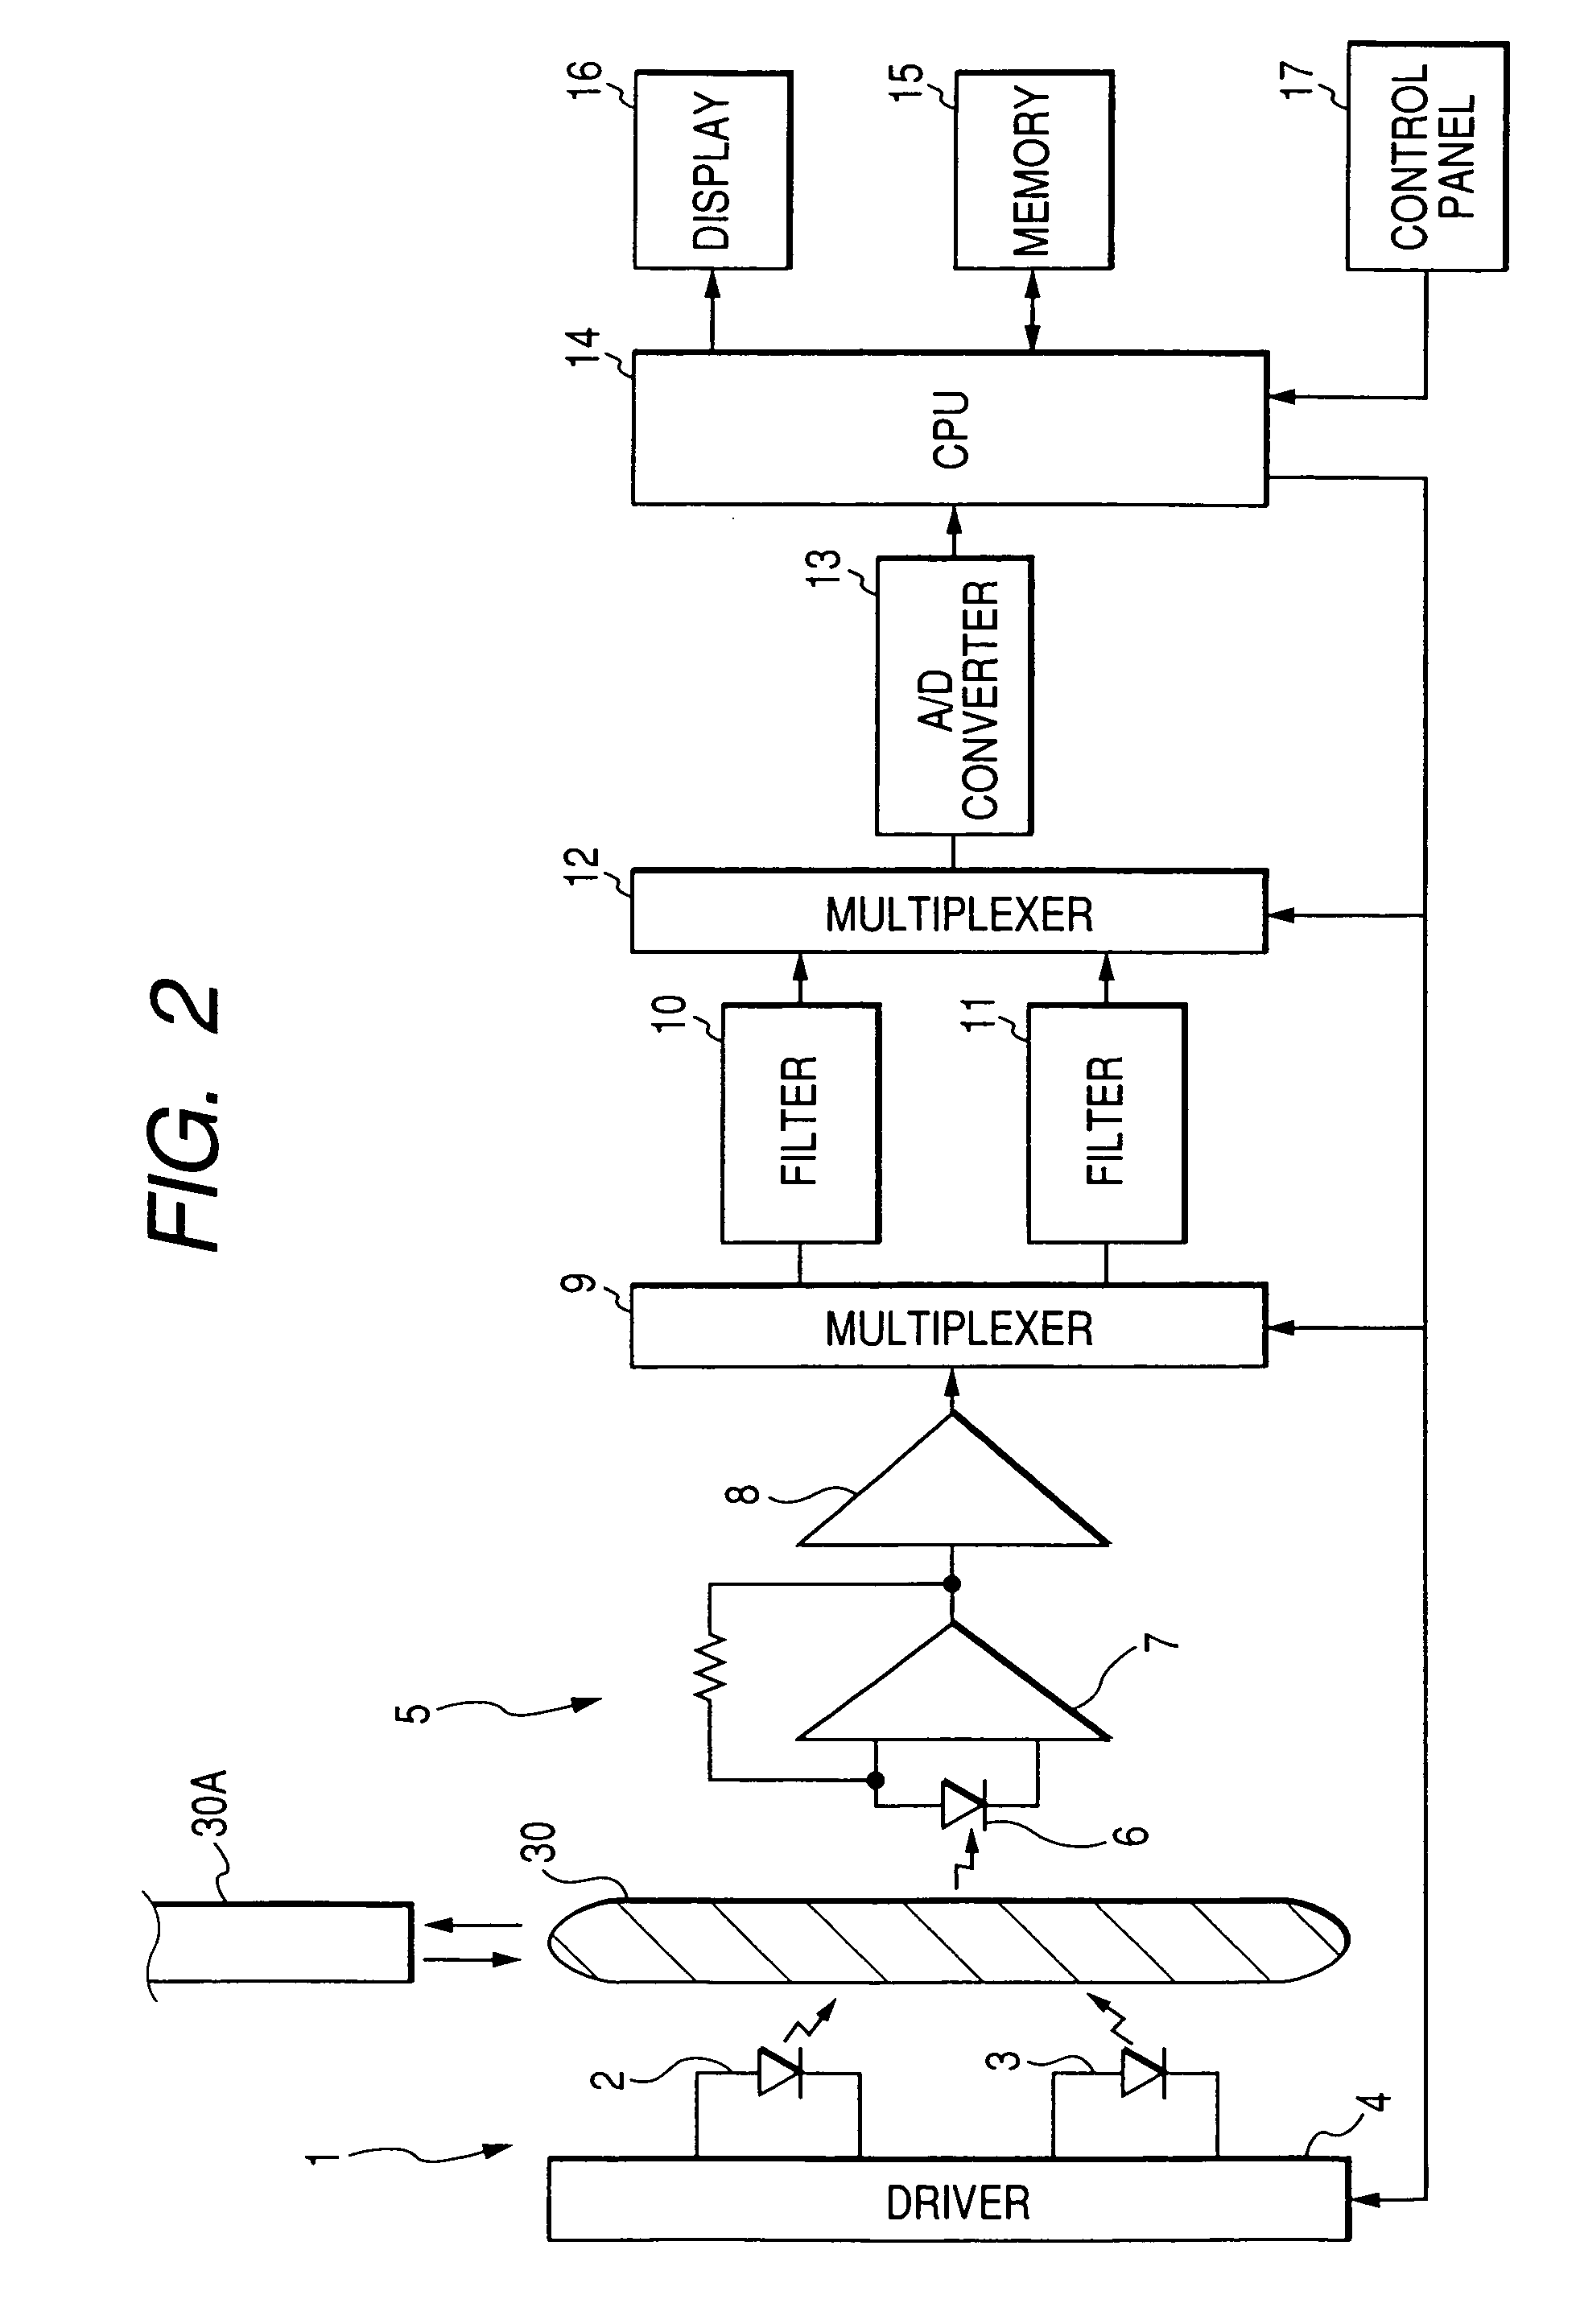 Apparatus for measuring concentration of light-absorbing substance in blood